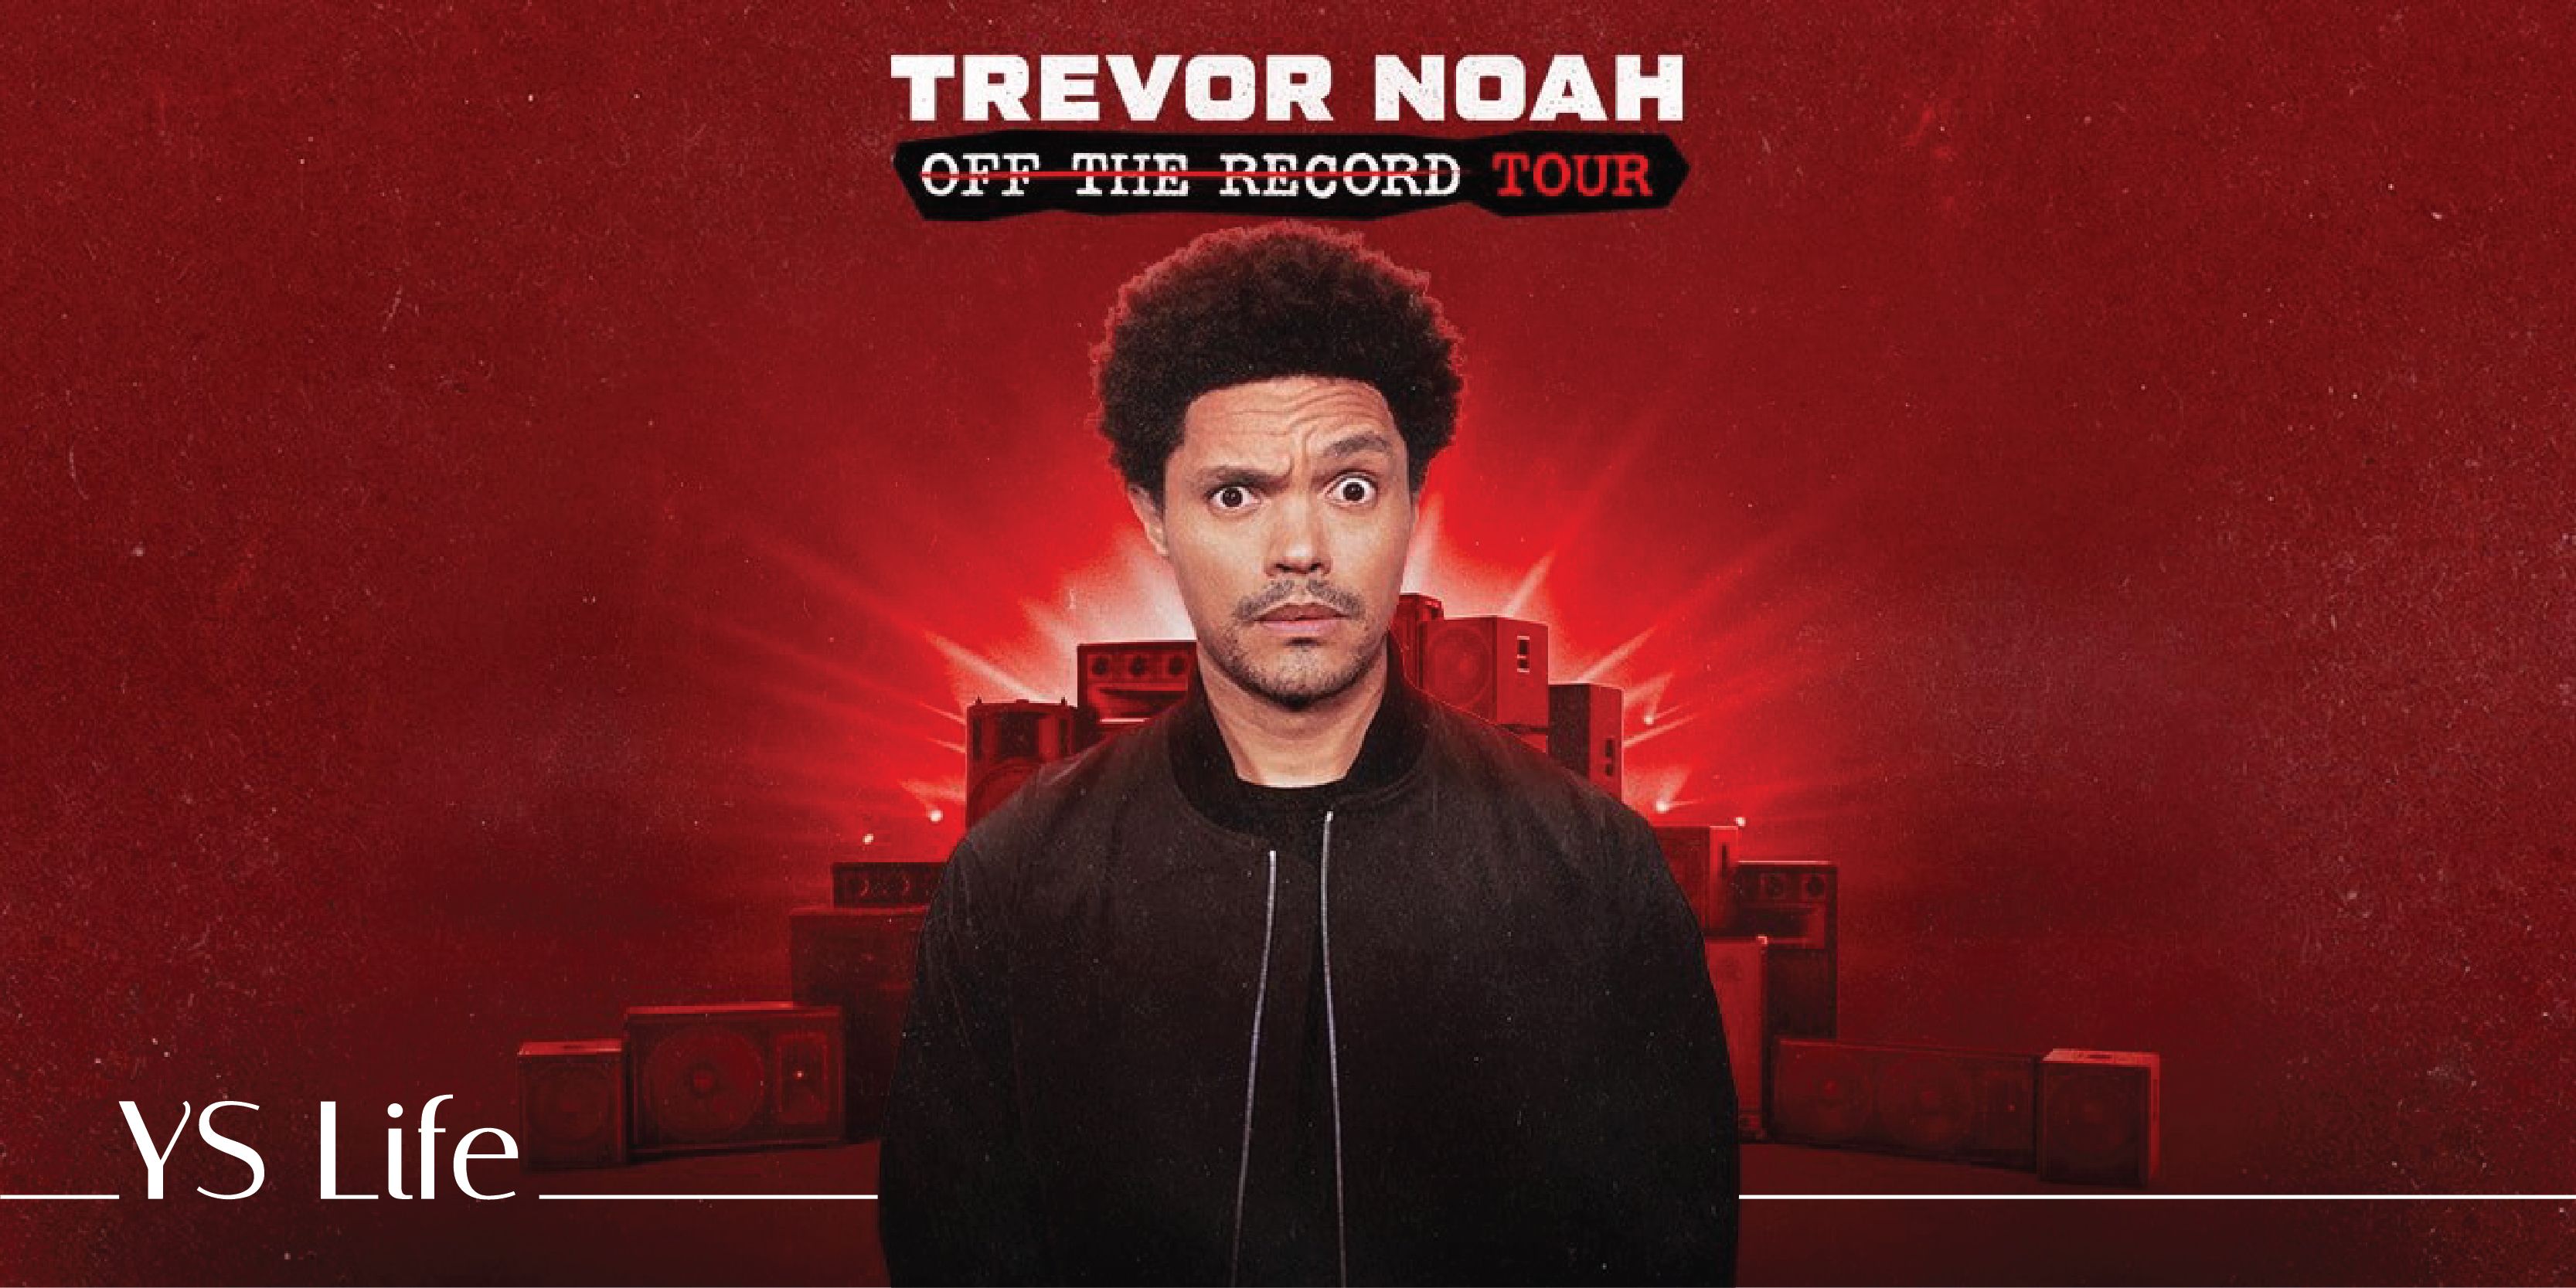 Trevor Noah comes to India with Off The Record Tour: All you need to know